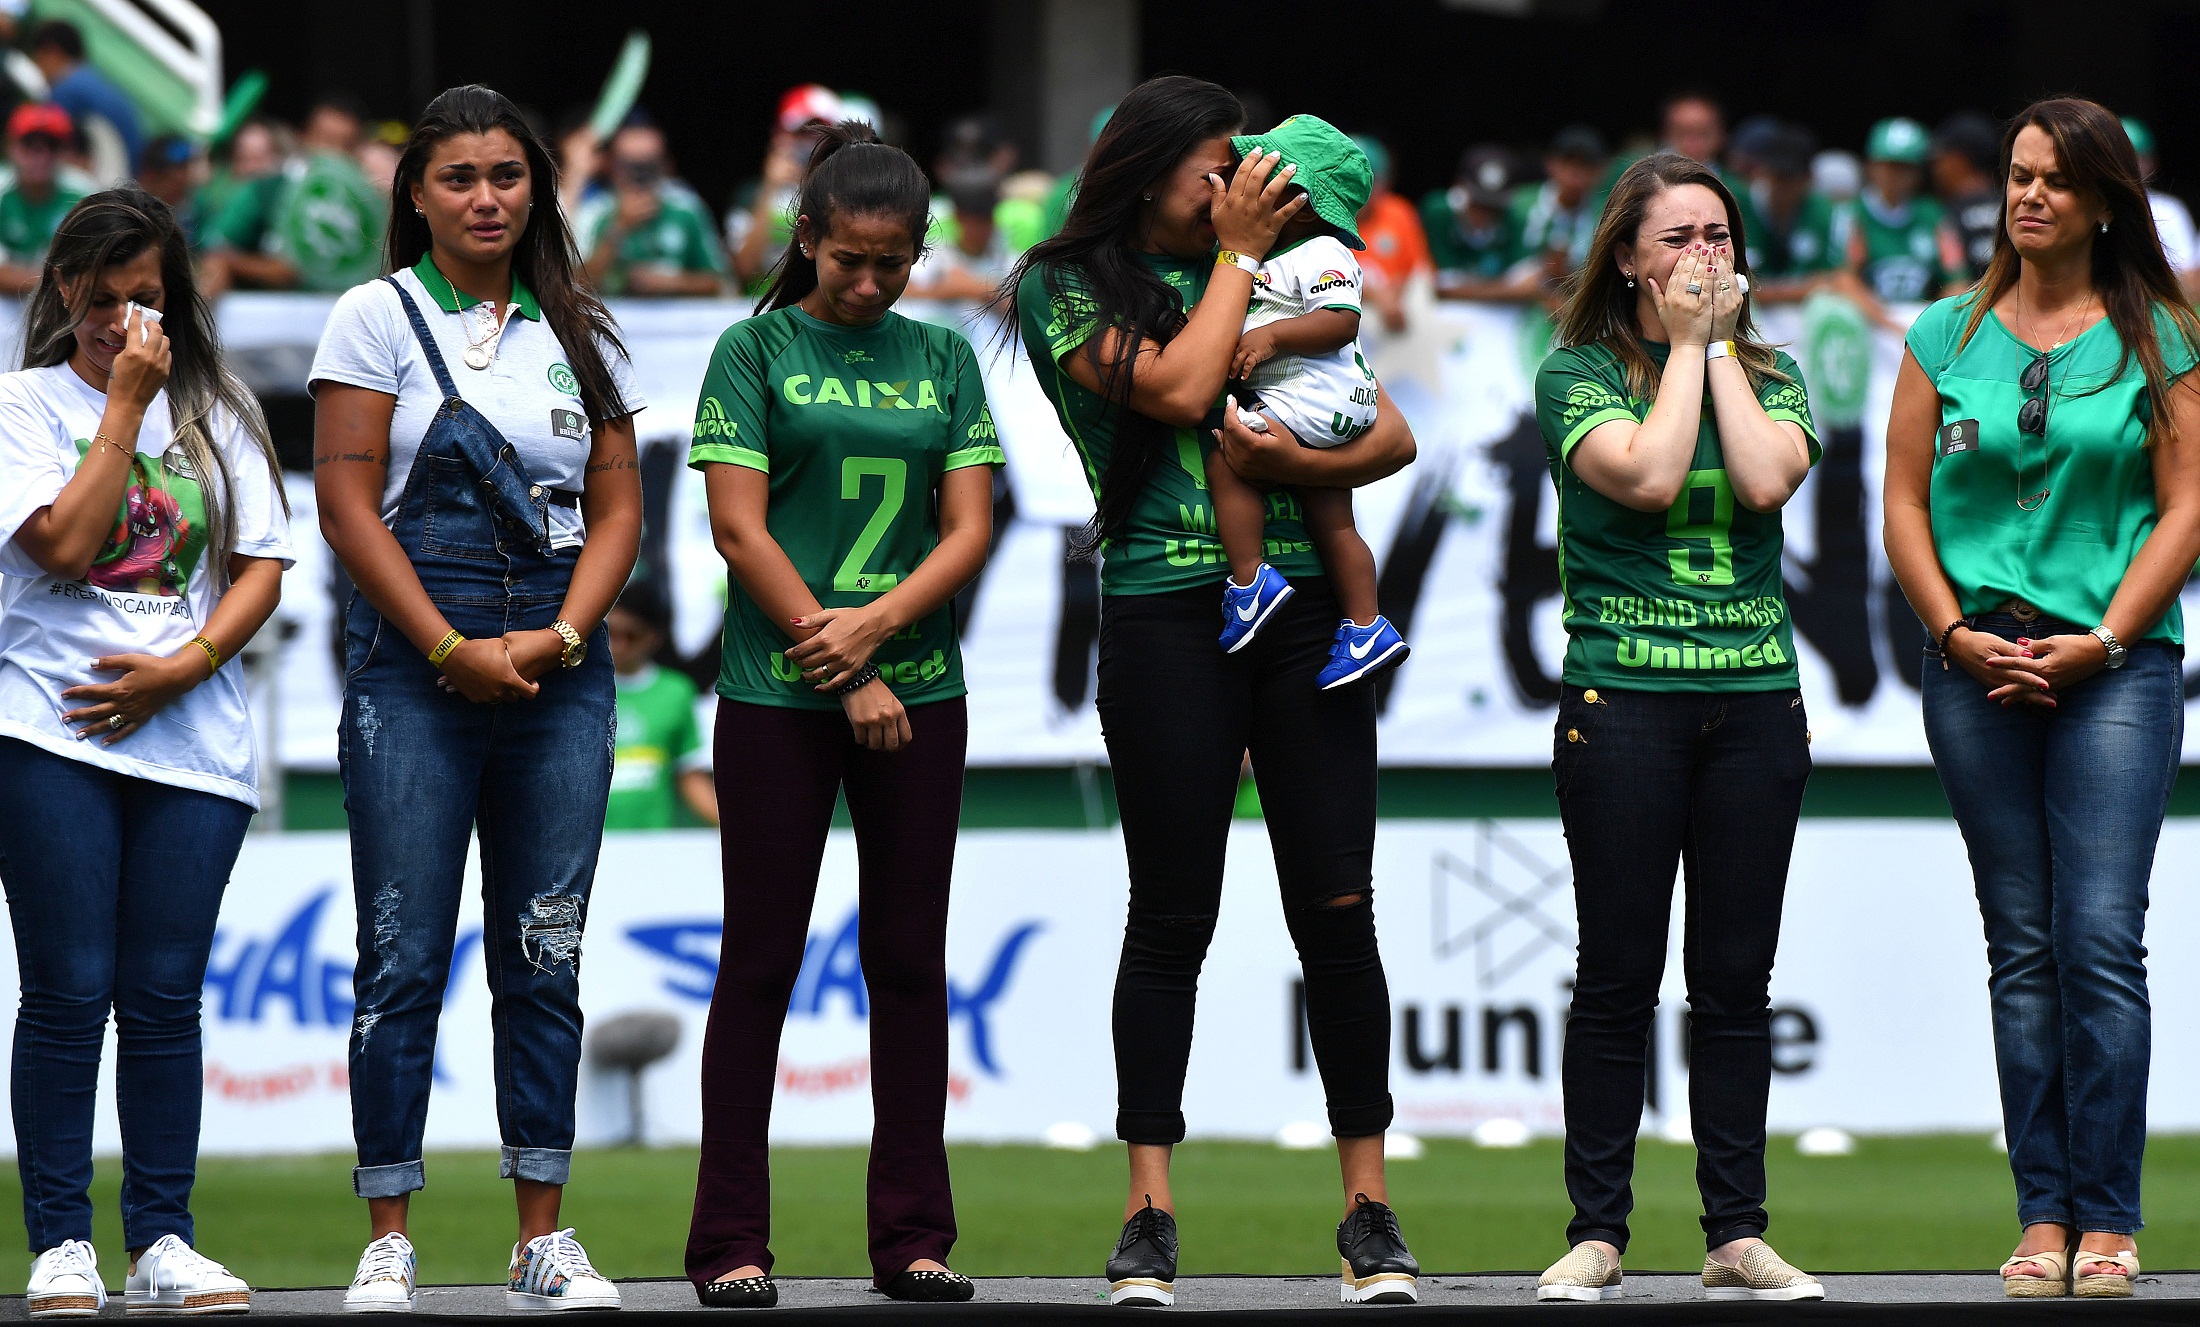 Relatives of players who died in the LaMia airplane crash in Colombia are seen at the Arena Conda stadium in Chapeco, Santa Catarina state, in southern Brazil on January 21, 2017, before a friendly match against Palmeiras - Brazilian Champion 2016.  Most of the members of the Chapocoense football team perished in a November 28, 2016 plane crash in Colombia. / AFP PHOTO / NELSON ALMEIDA